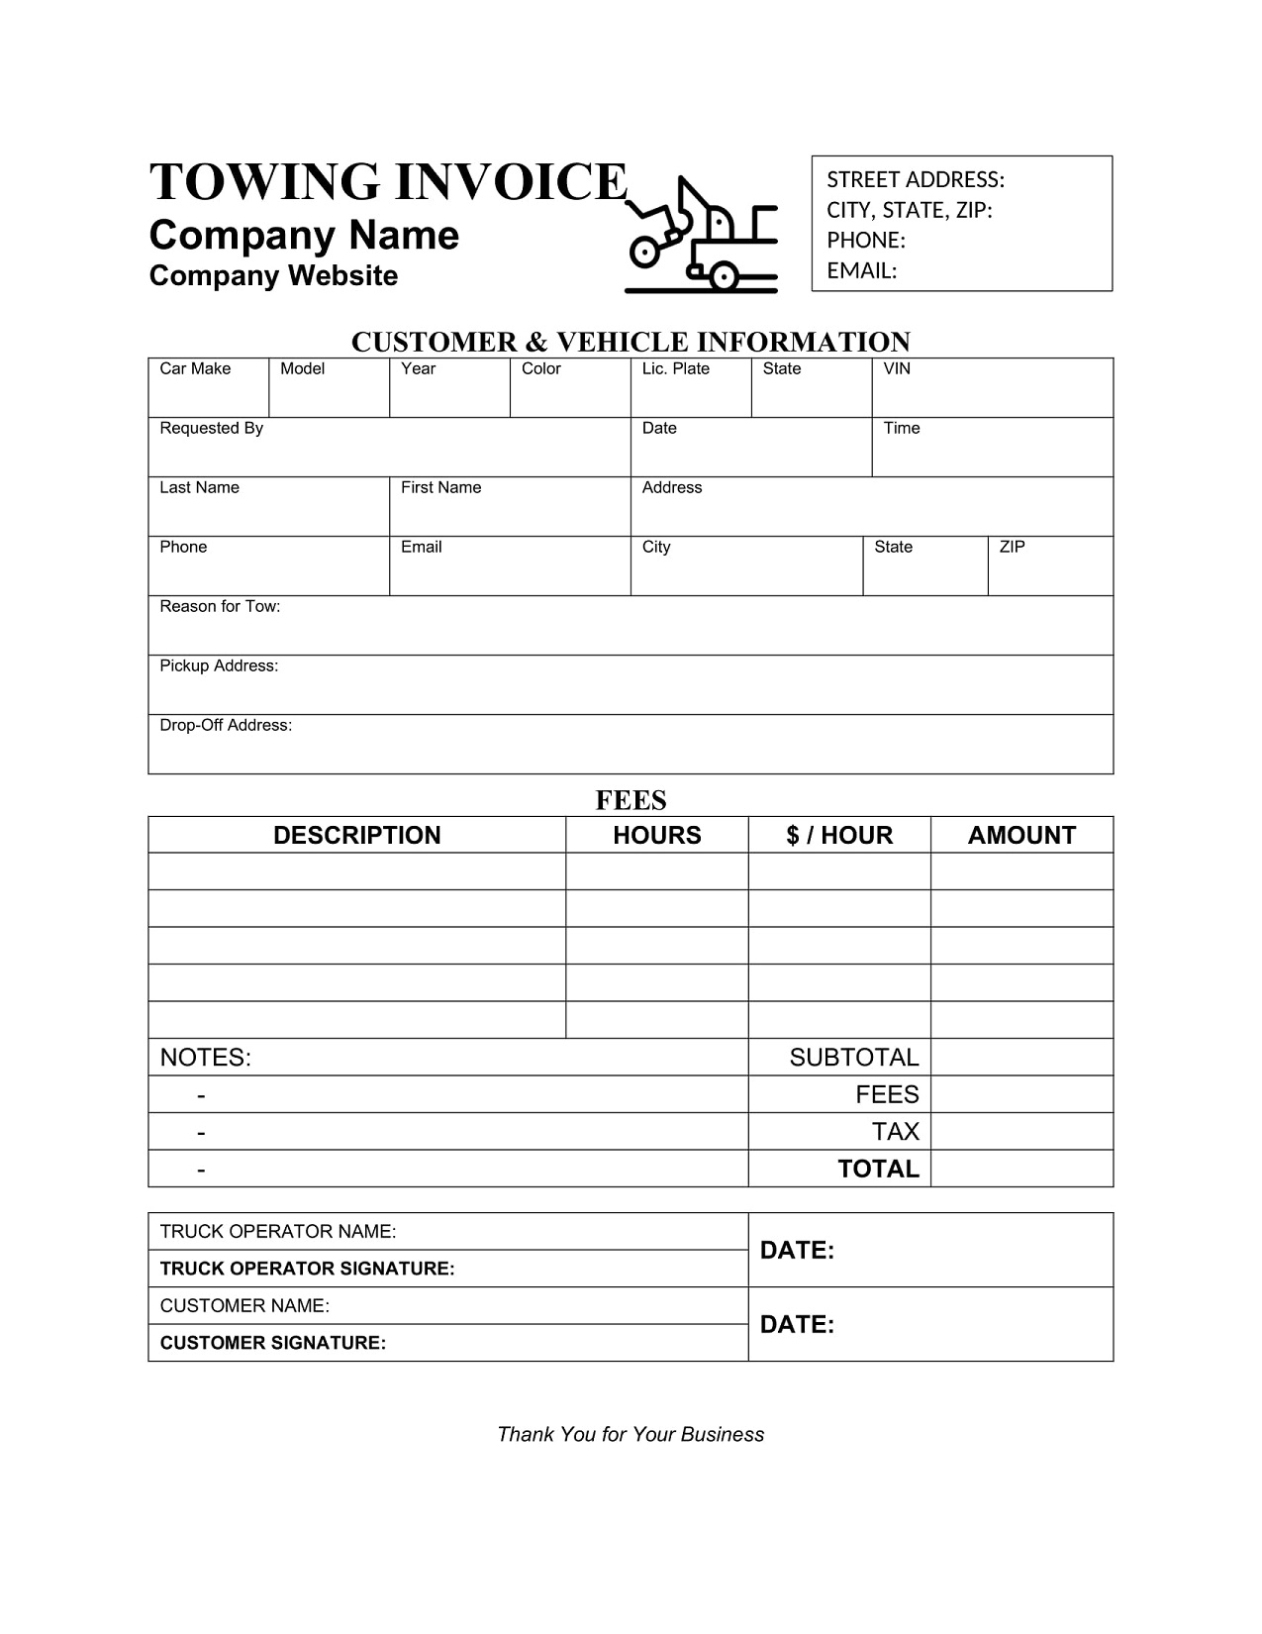 Towing Invoice Template Sample | Geneevarojr Within Towing Business Plan Template